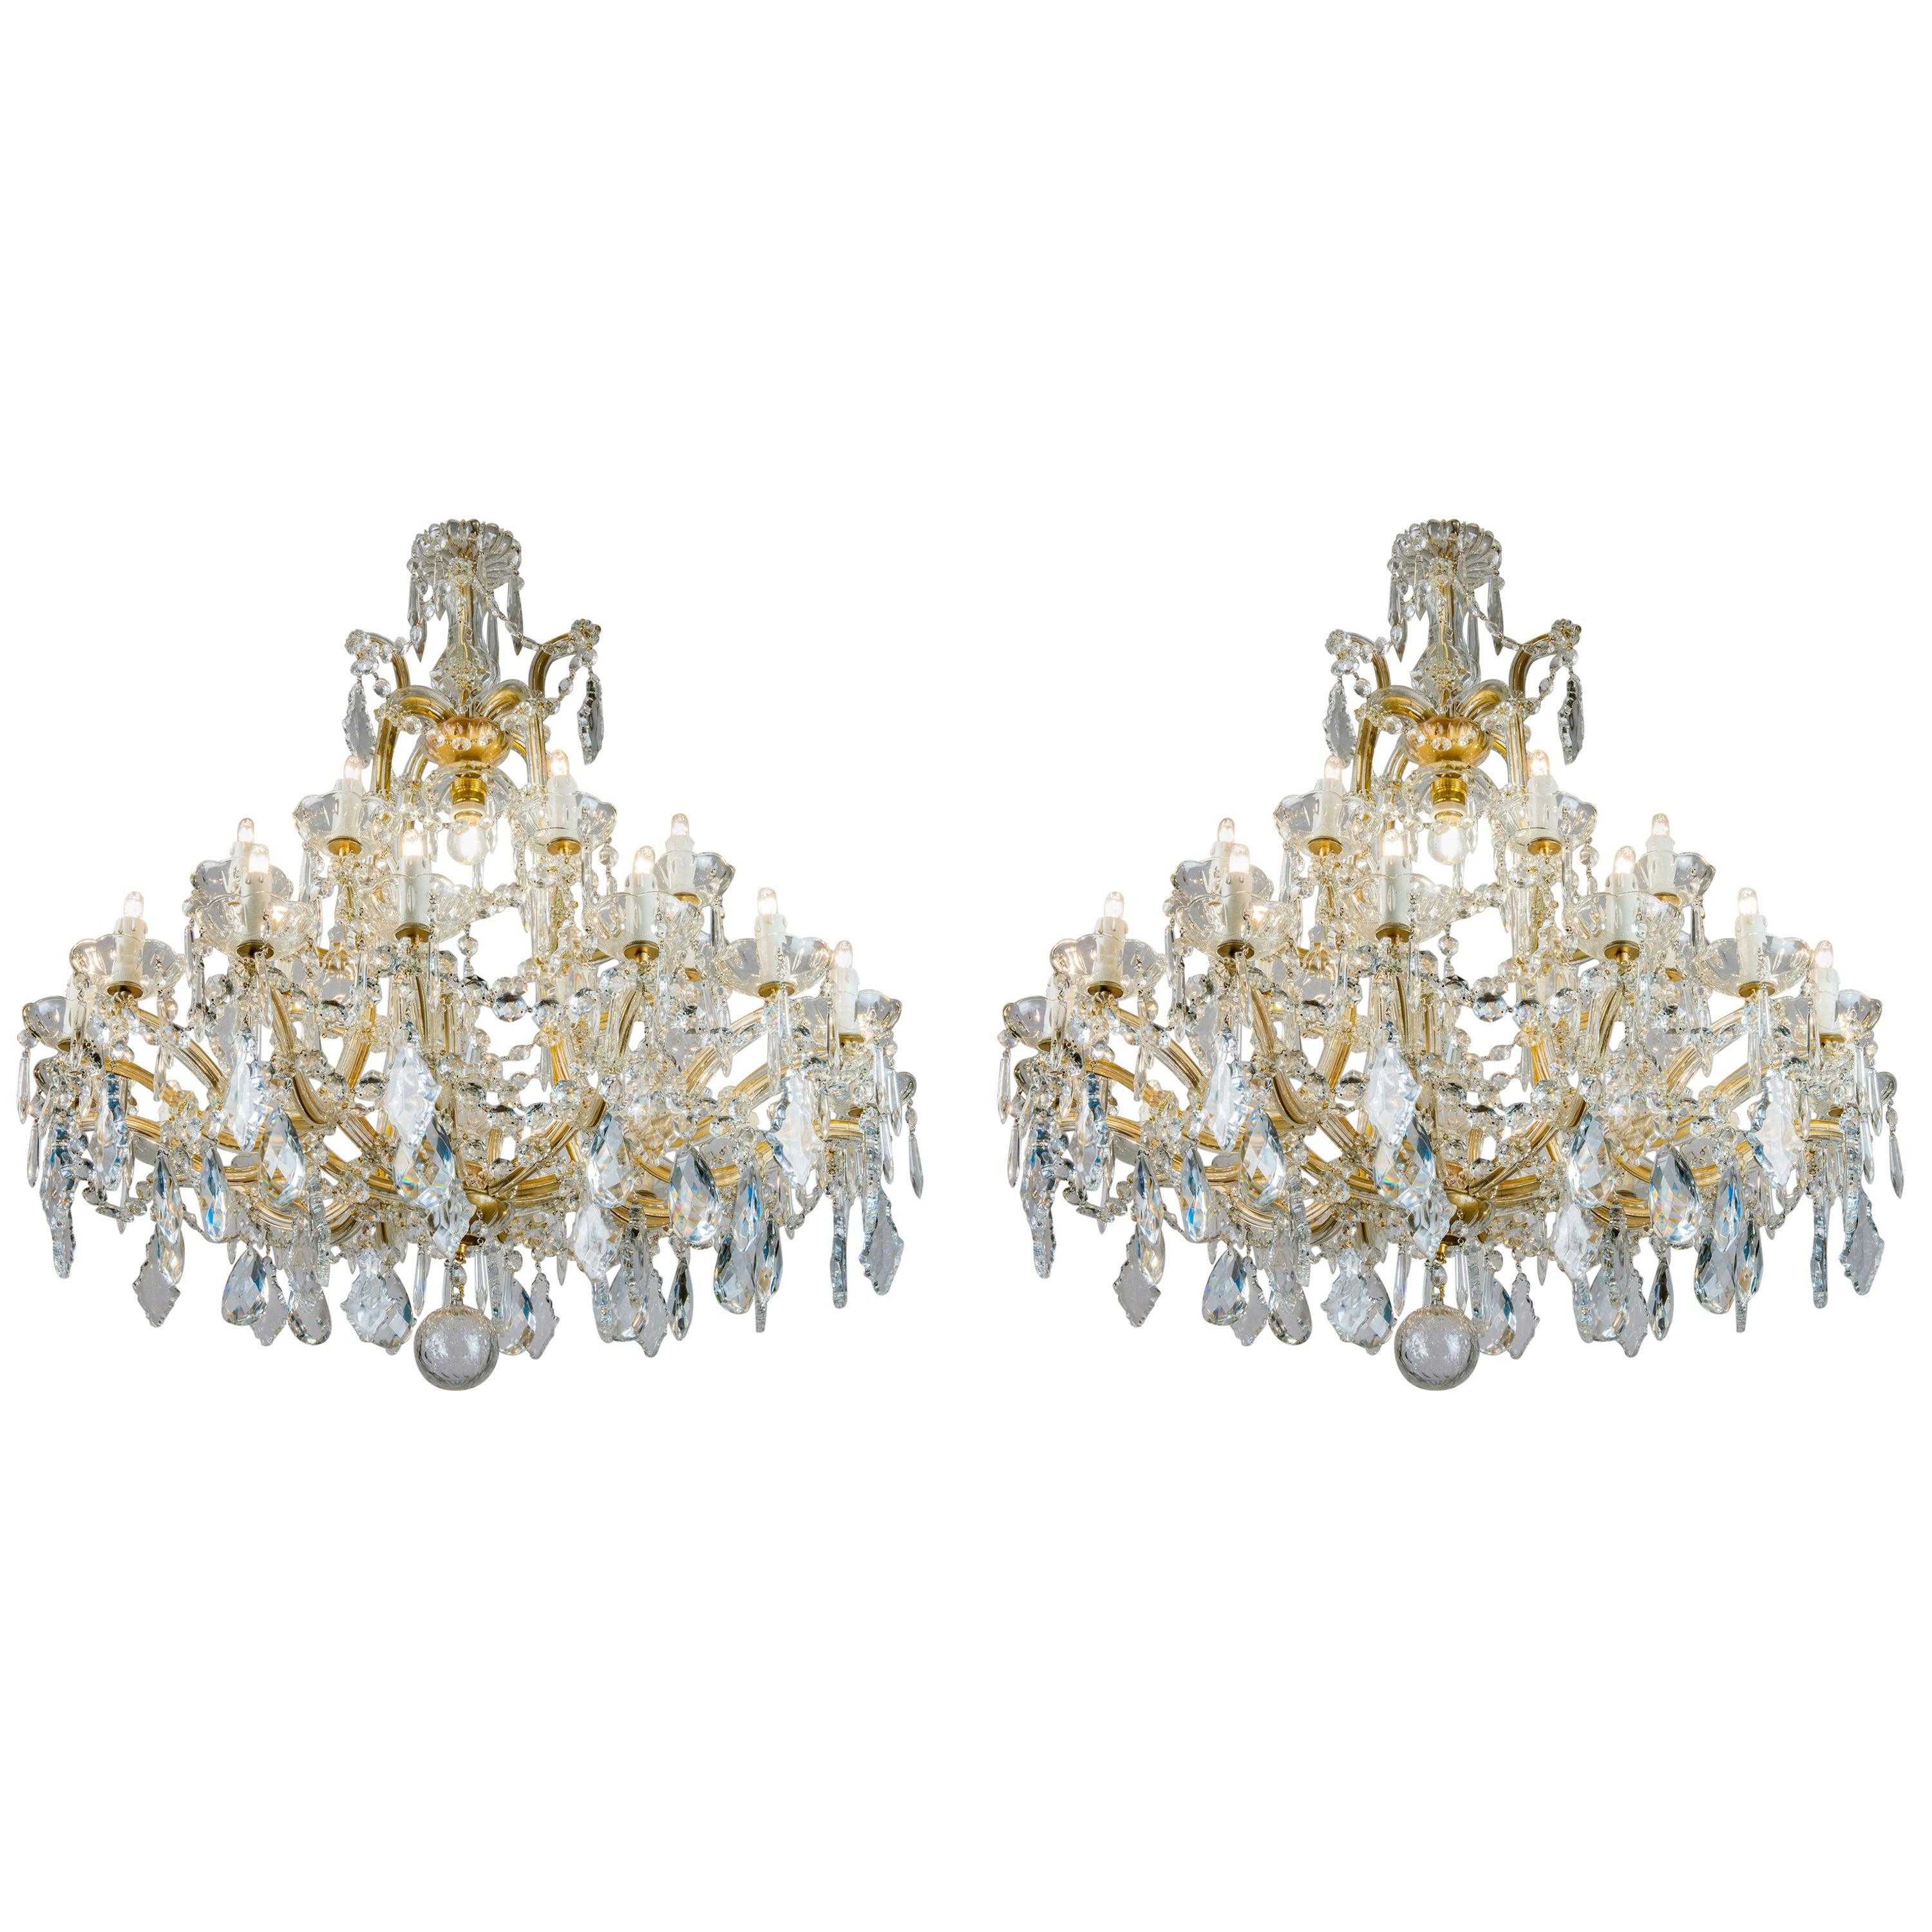 Pair of 20th Century Italian Crystal Chandeliers Maria Therese Style Two-Tier